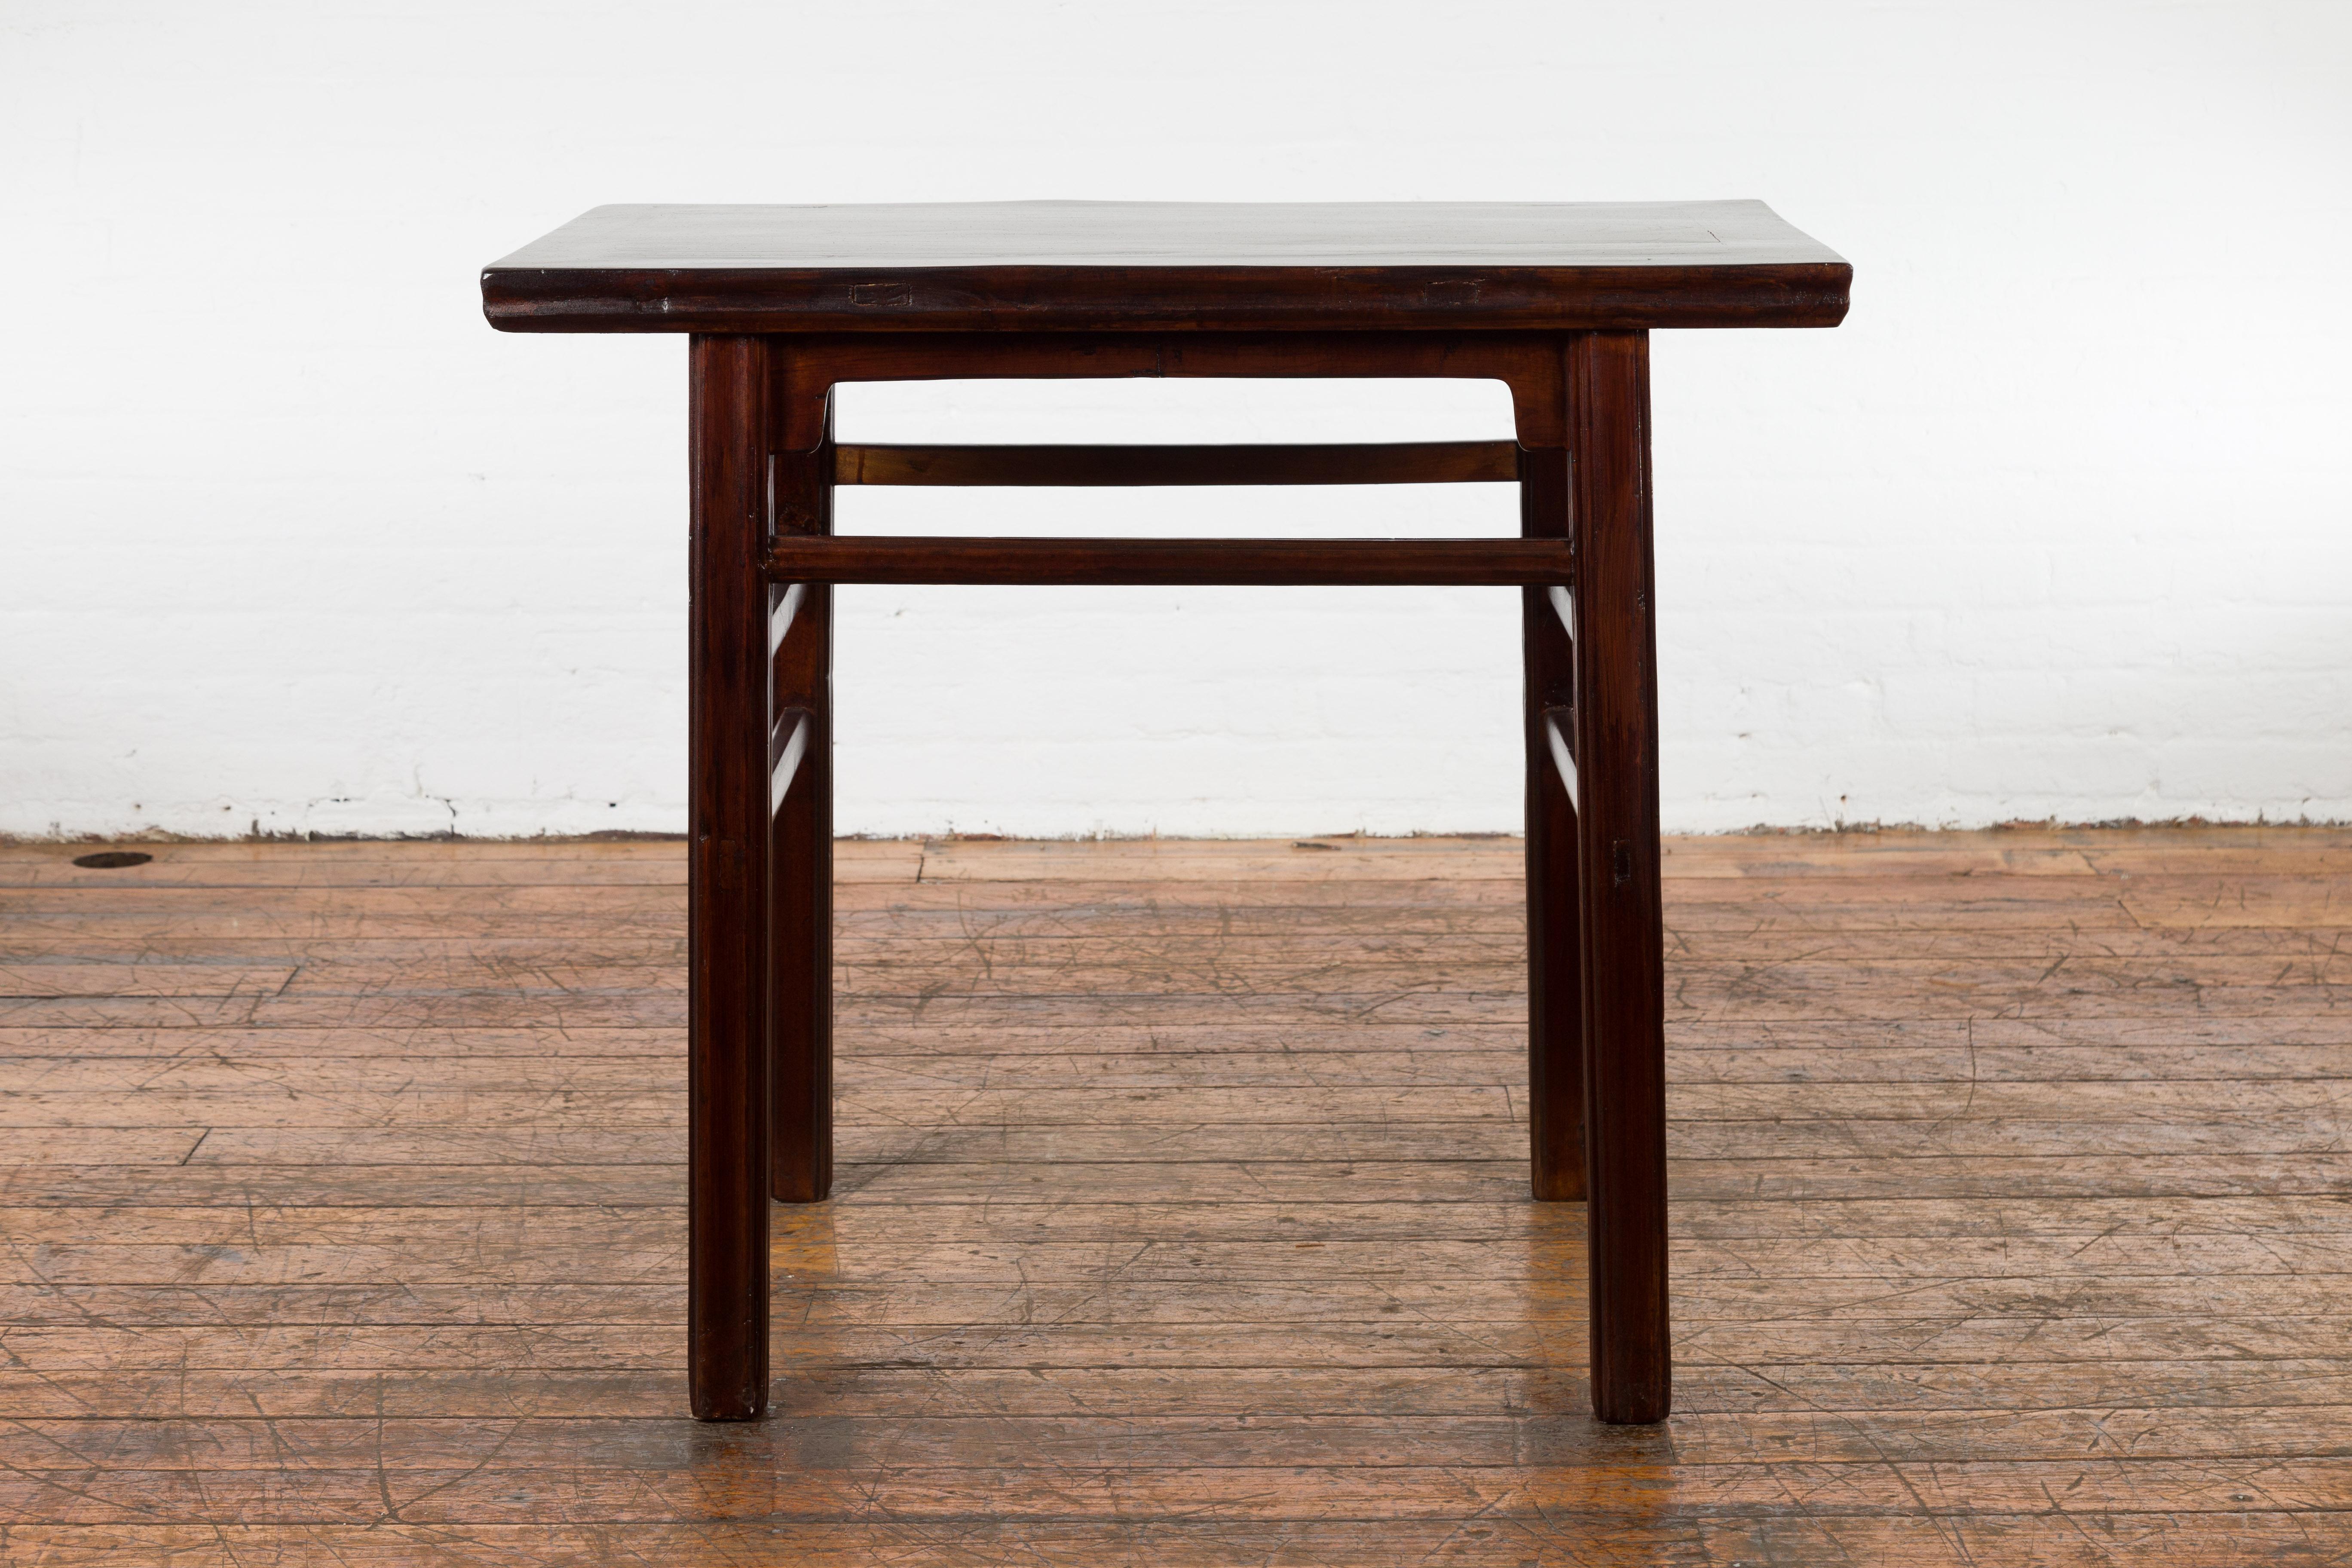 A Chinese late Qing Dynasty period elm wood scholar's table from the early 20th century with carved aprons, side stretchers and custom lacquer. Created in China during the late Qing Dynasty period in the early years of the 20th century, this elm